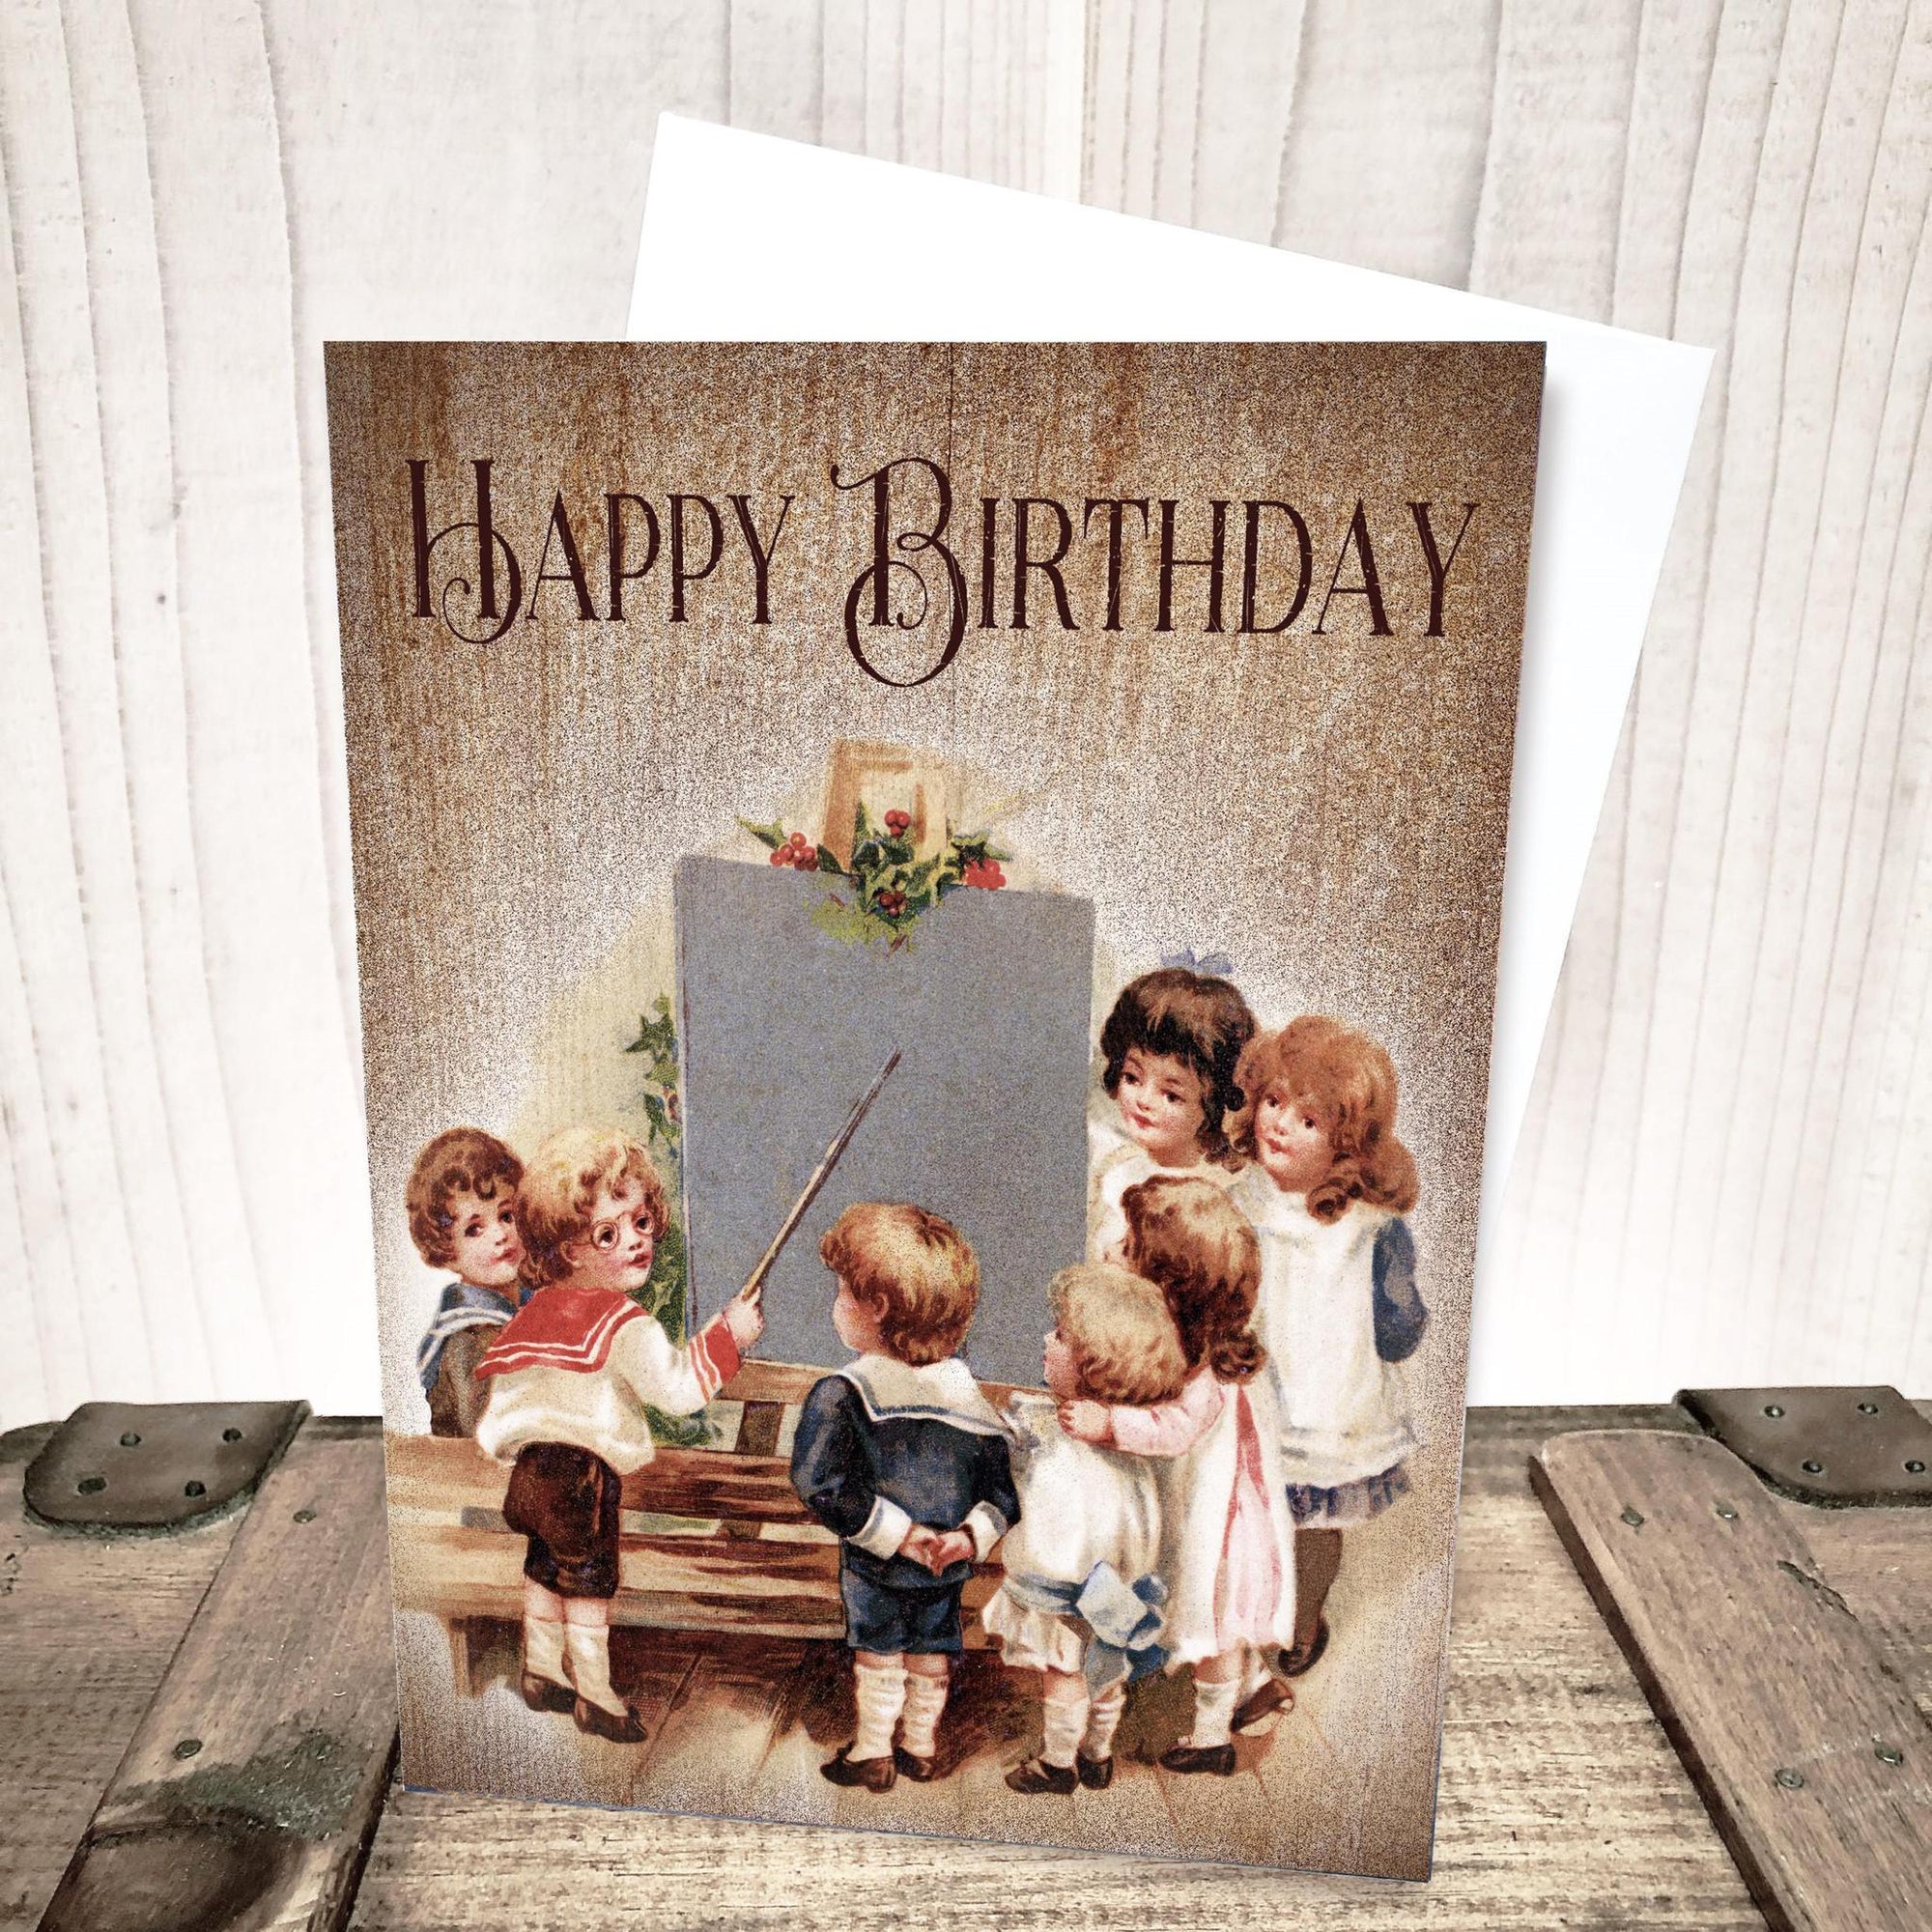 Back to School Vintage Birthday Card by Yesterday's Best